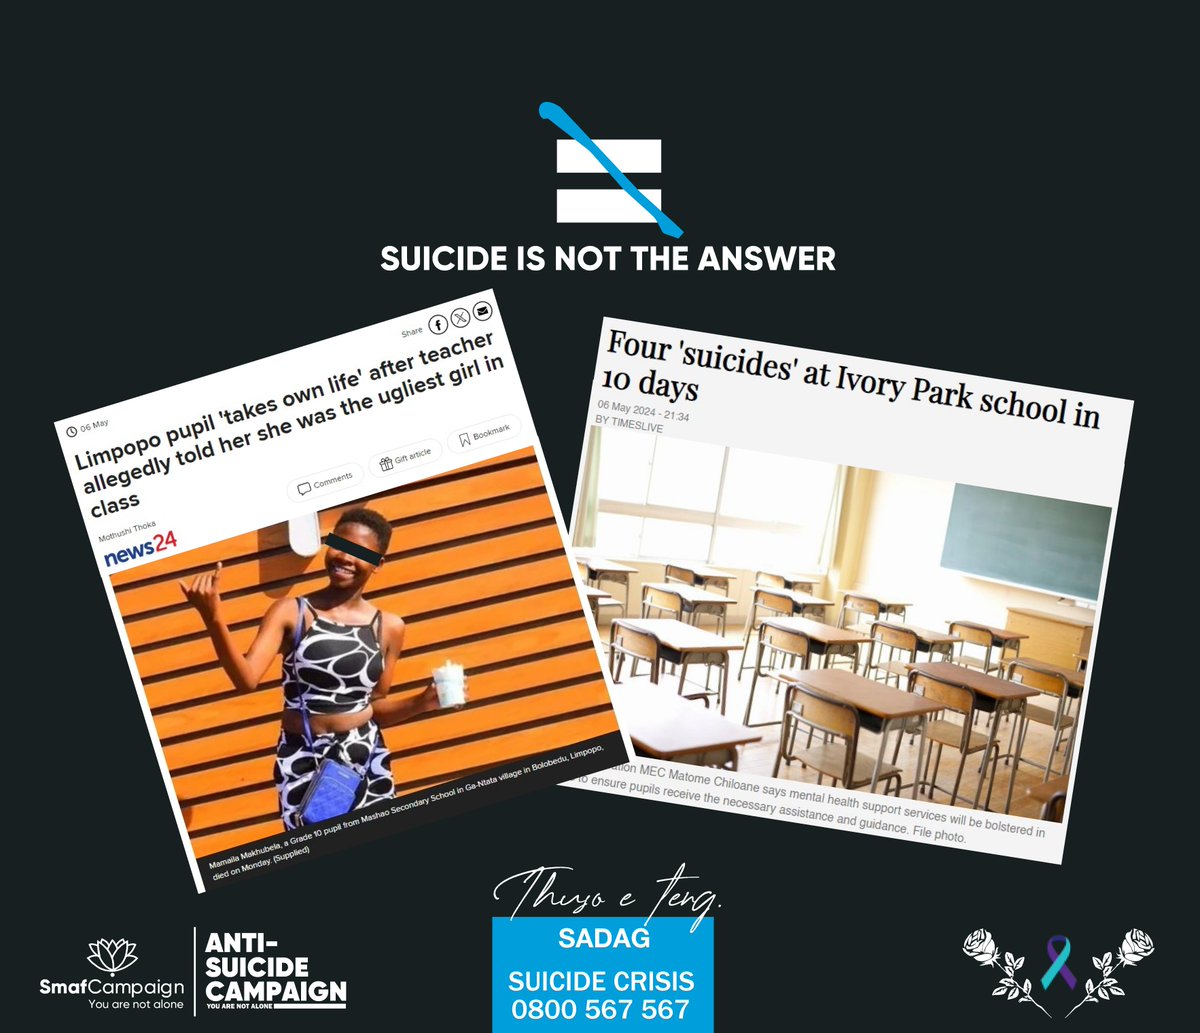 Suicide is not the answer, confiding and seeking help is. #Thusoeteng #ChooseToLive #SmafCampaign #YouAreNotAlone #AntiSuicideCampaign